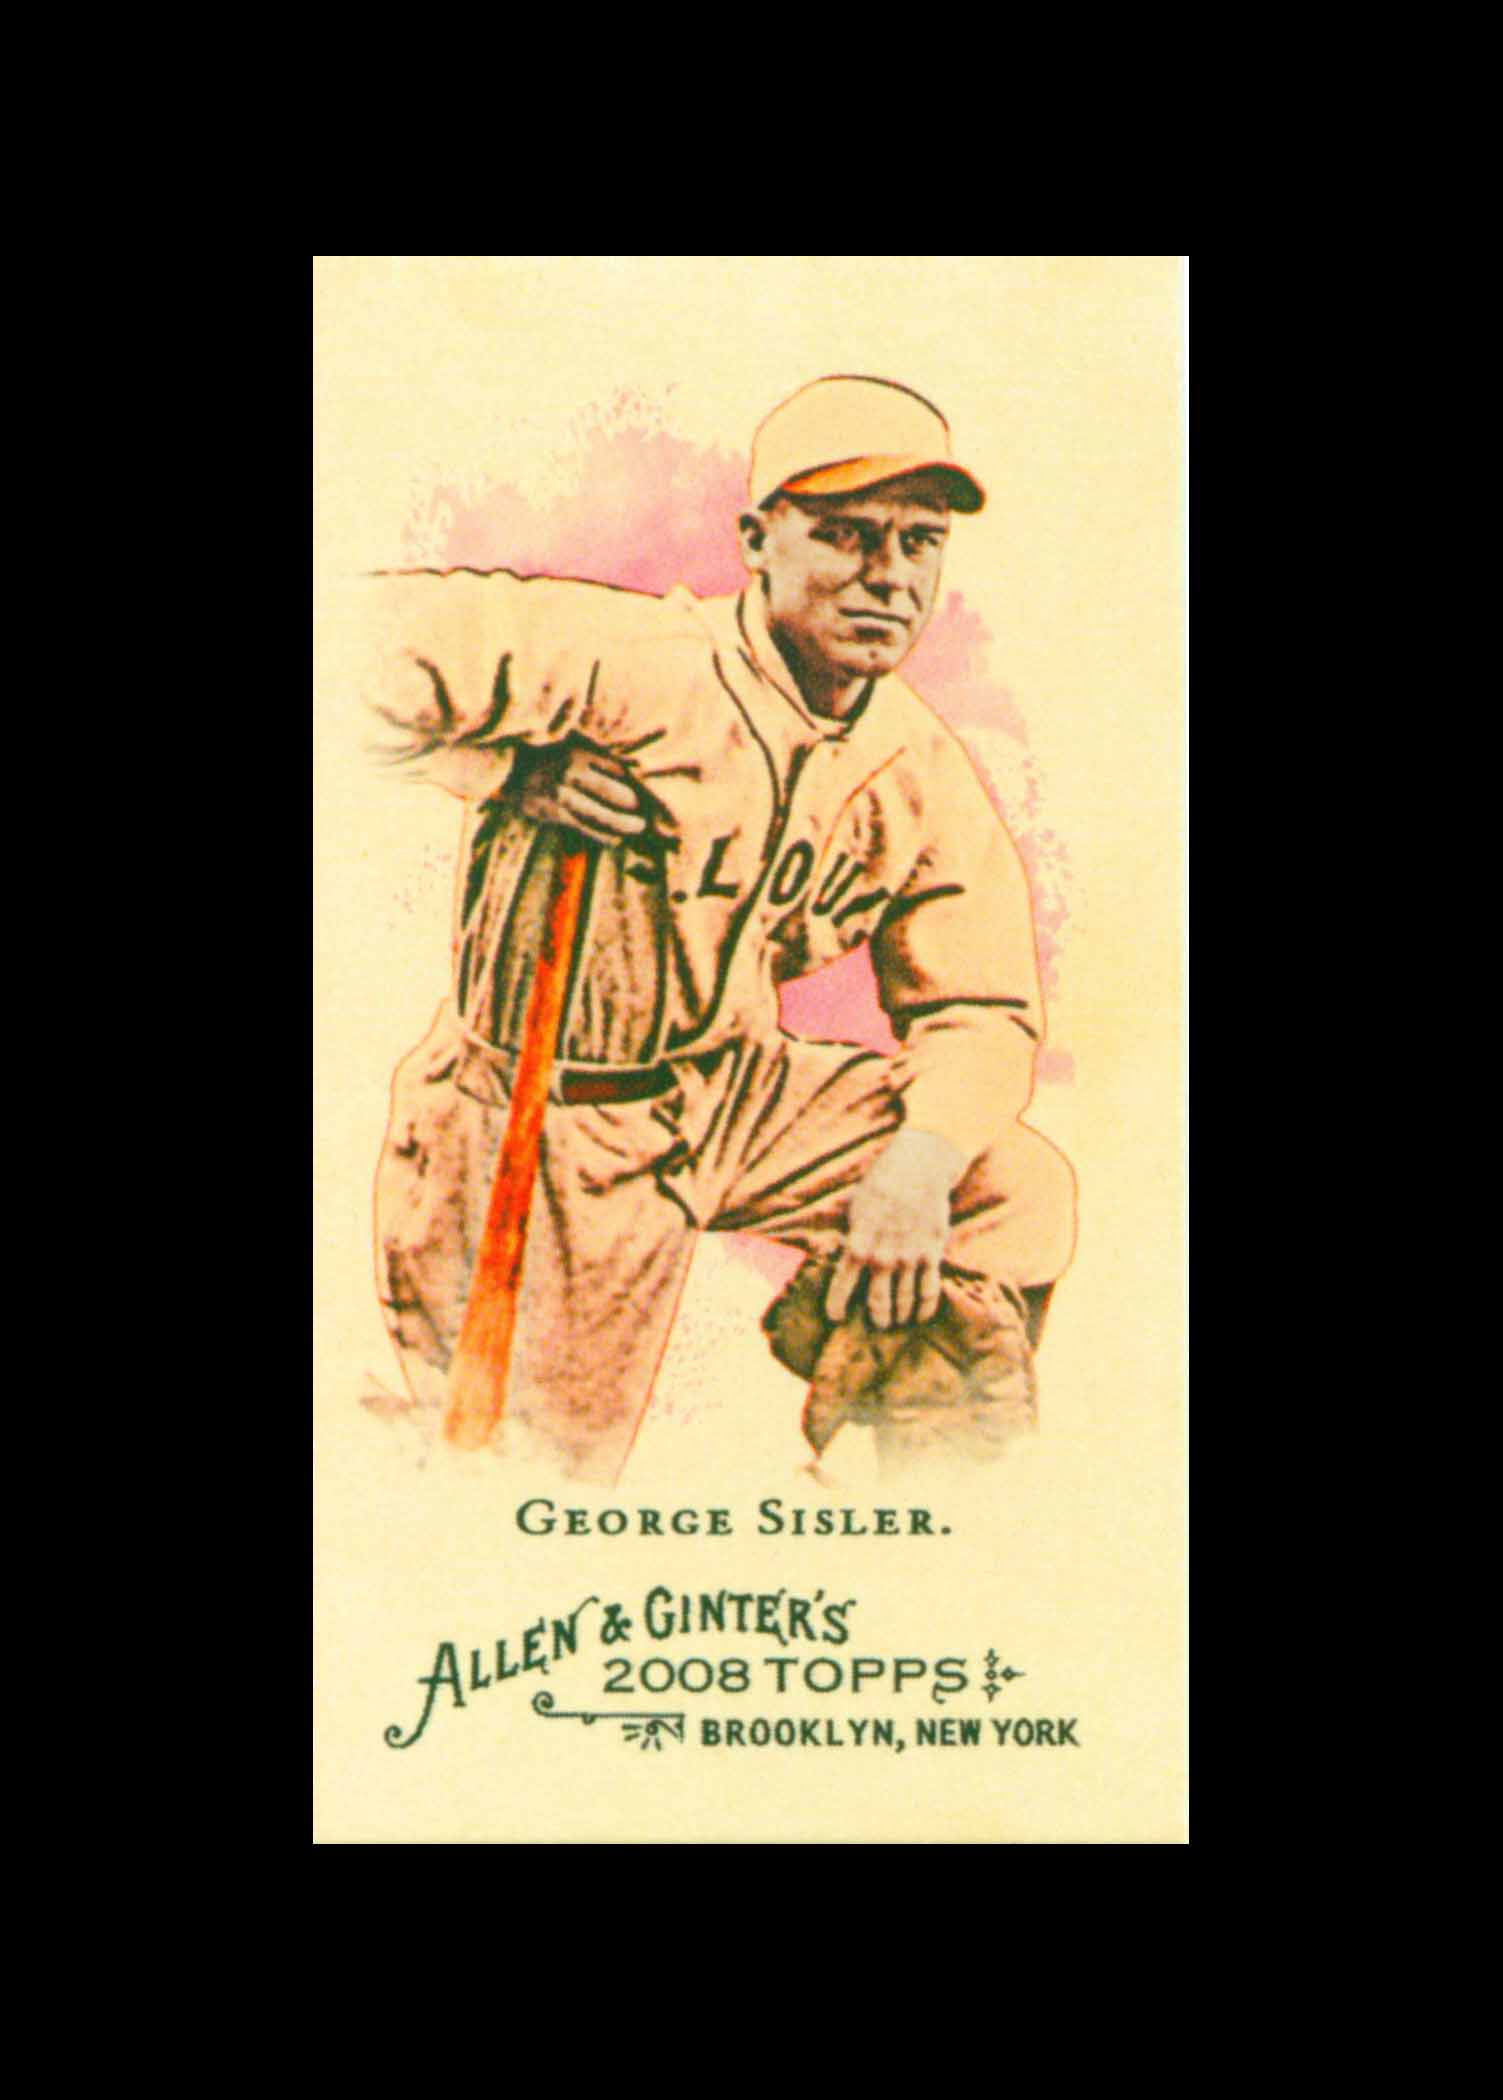 2008 Topps Allen and Ginter Mini Baseball Icons